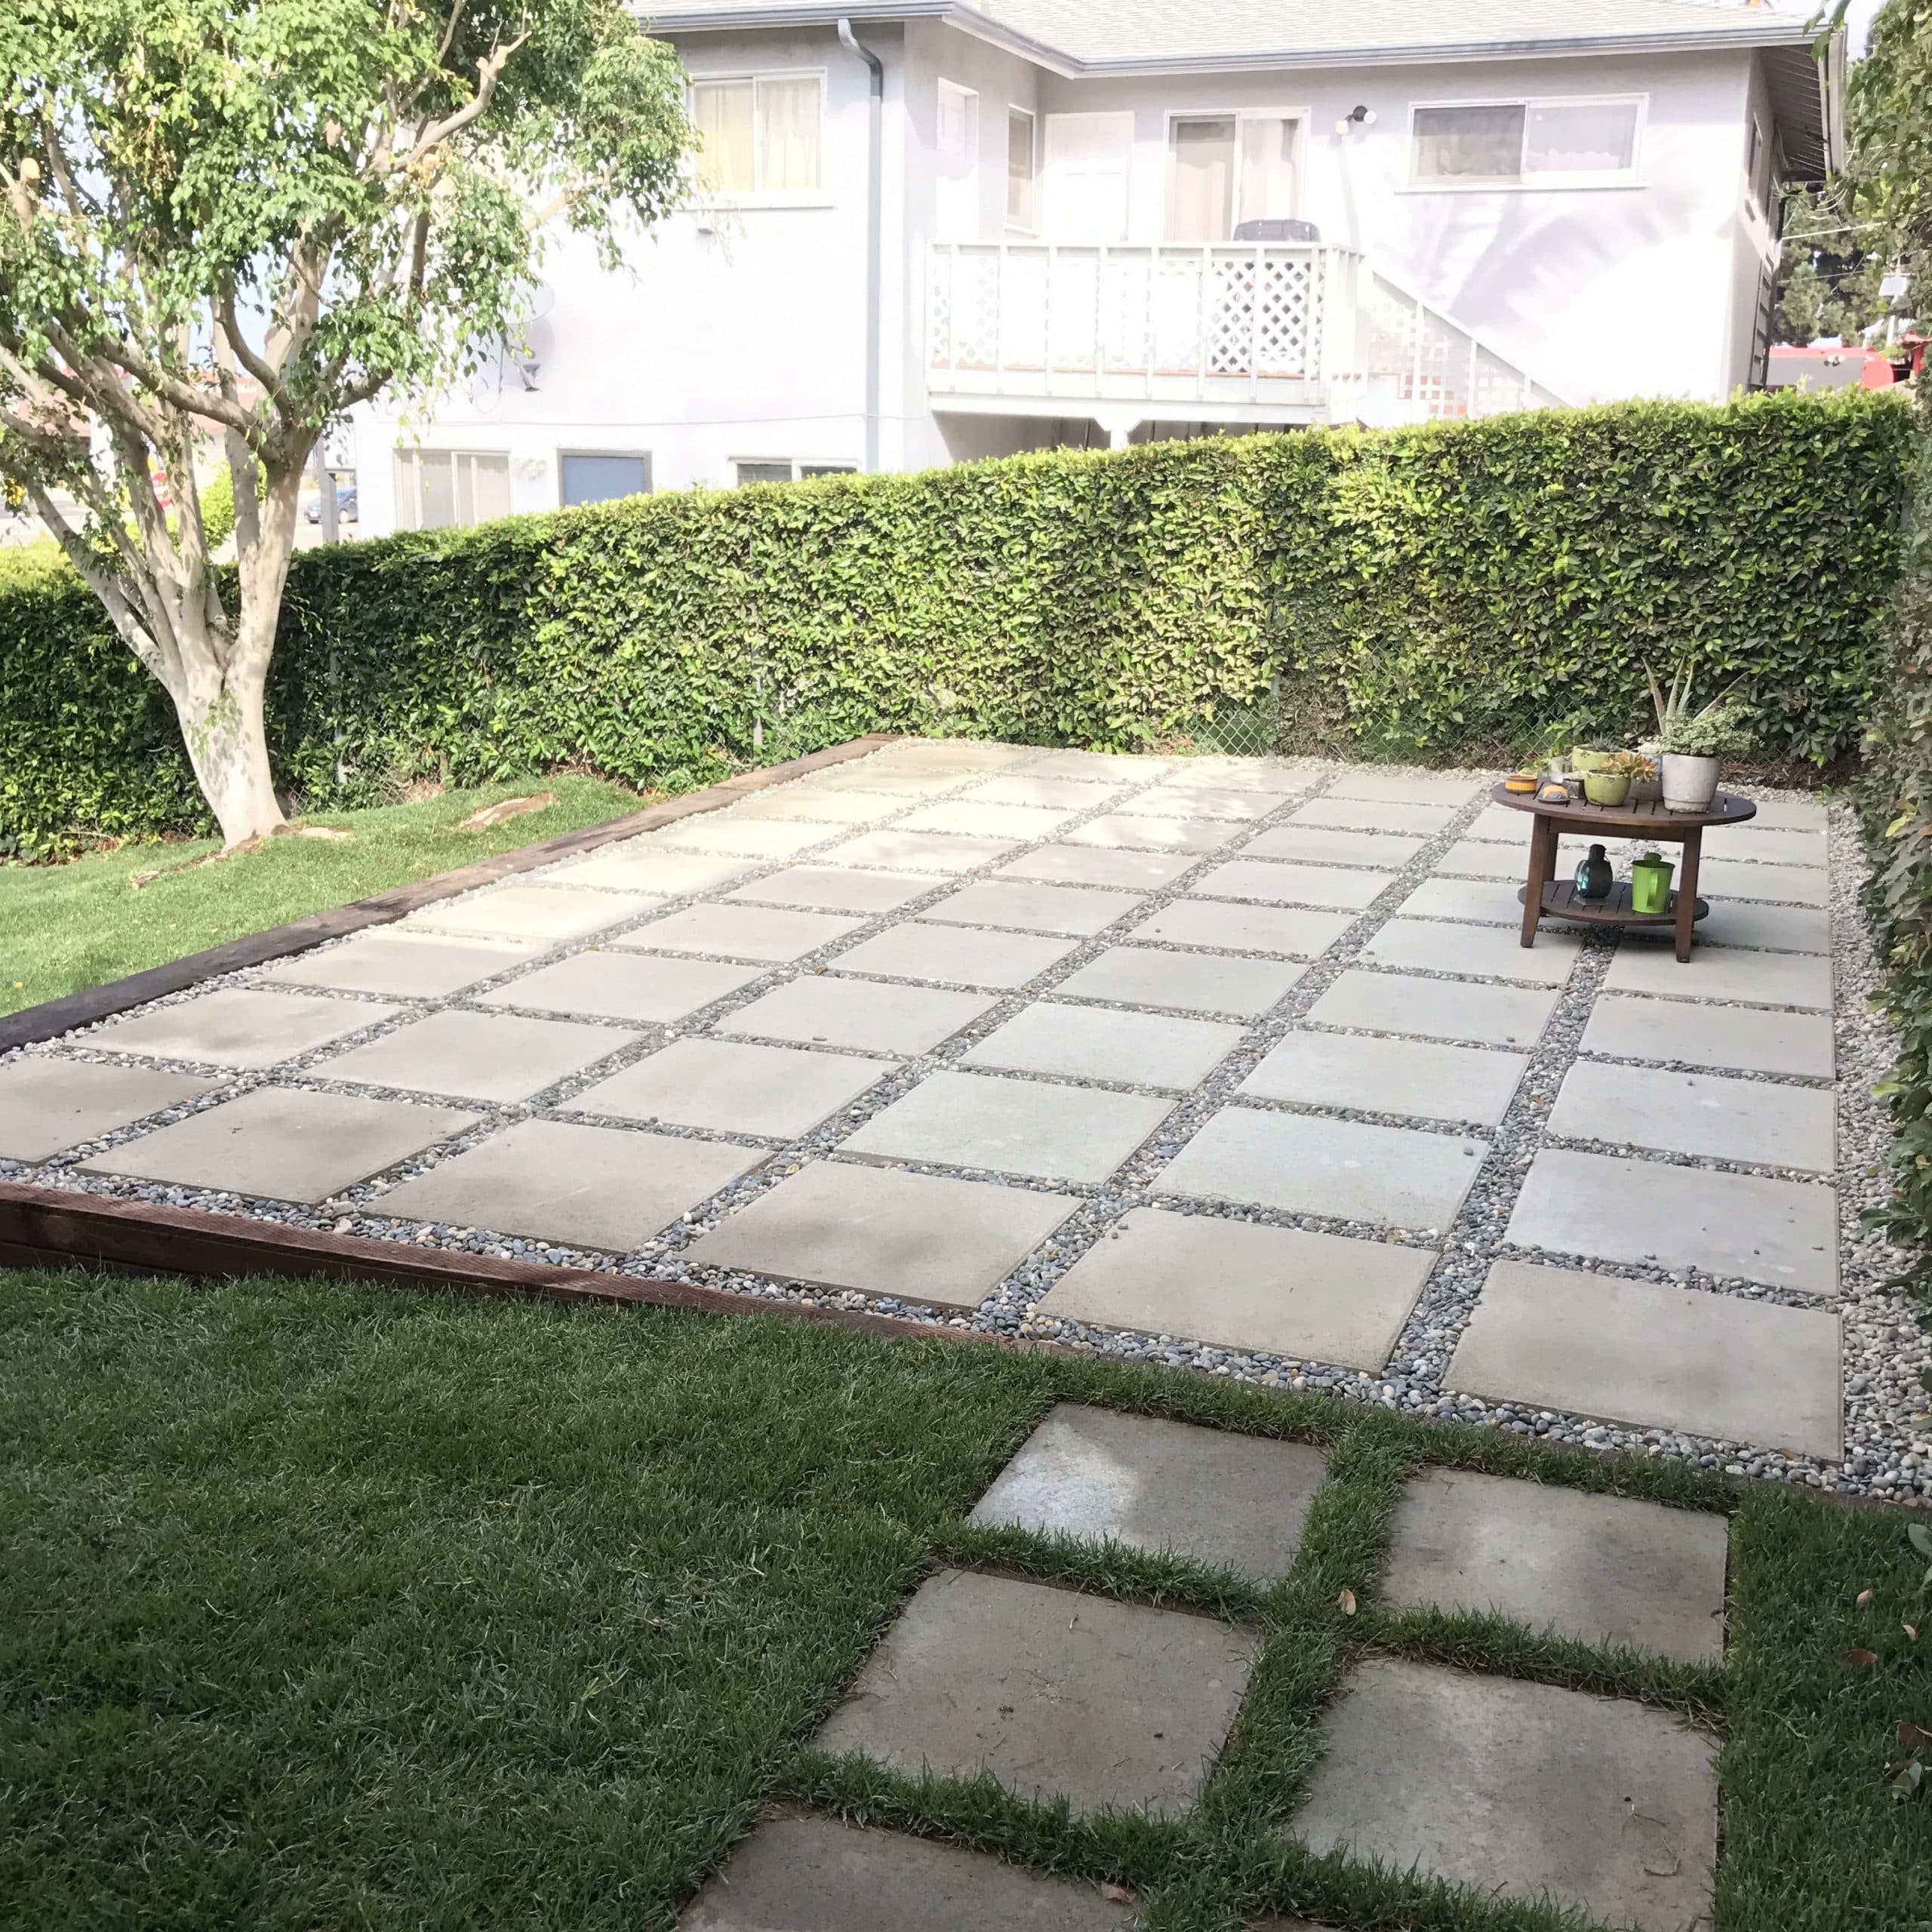 Large pavers used to create patio in backyard. Quick and easy ...